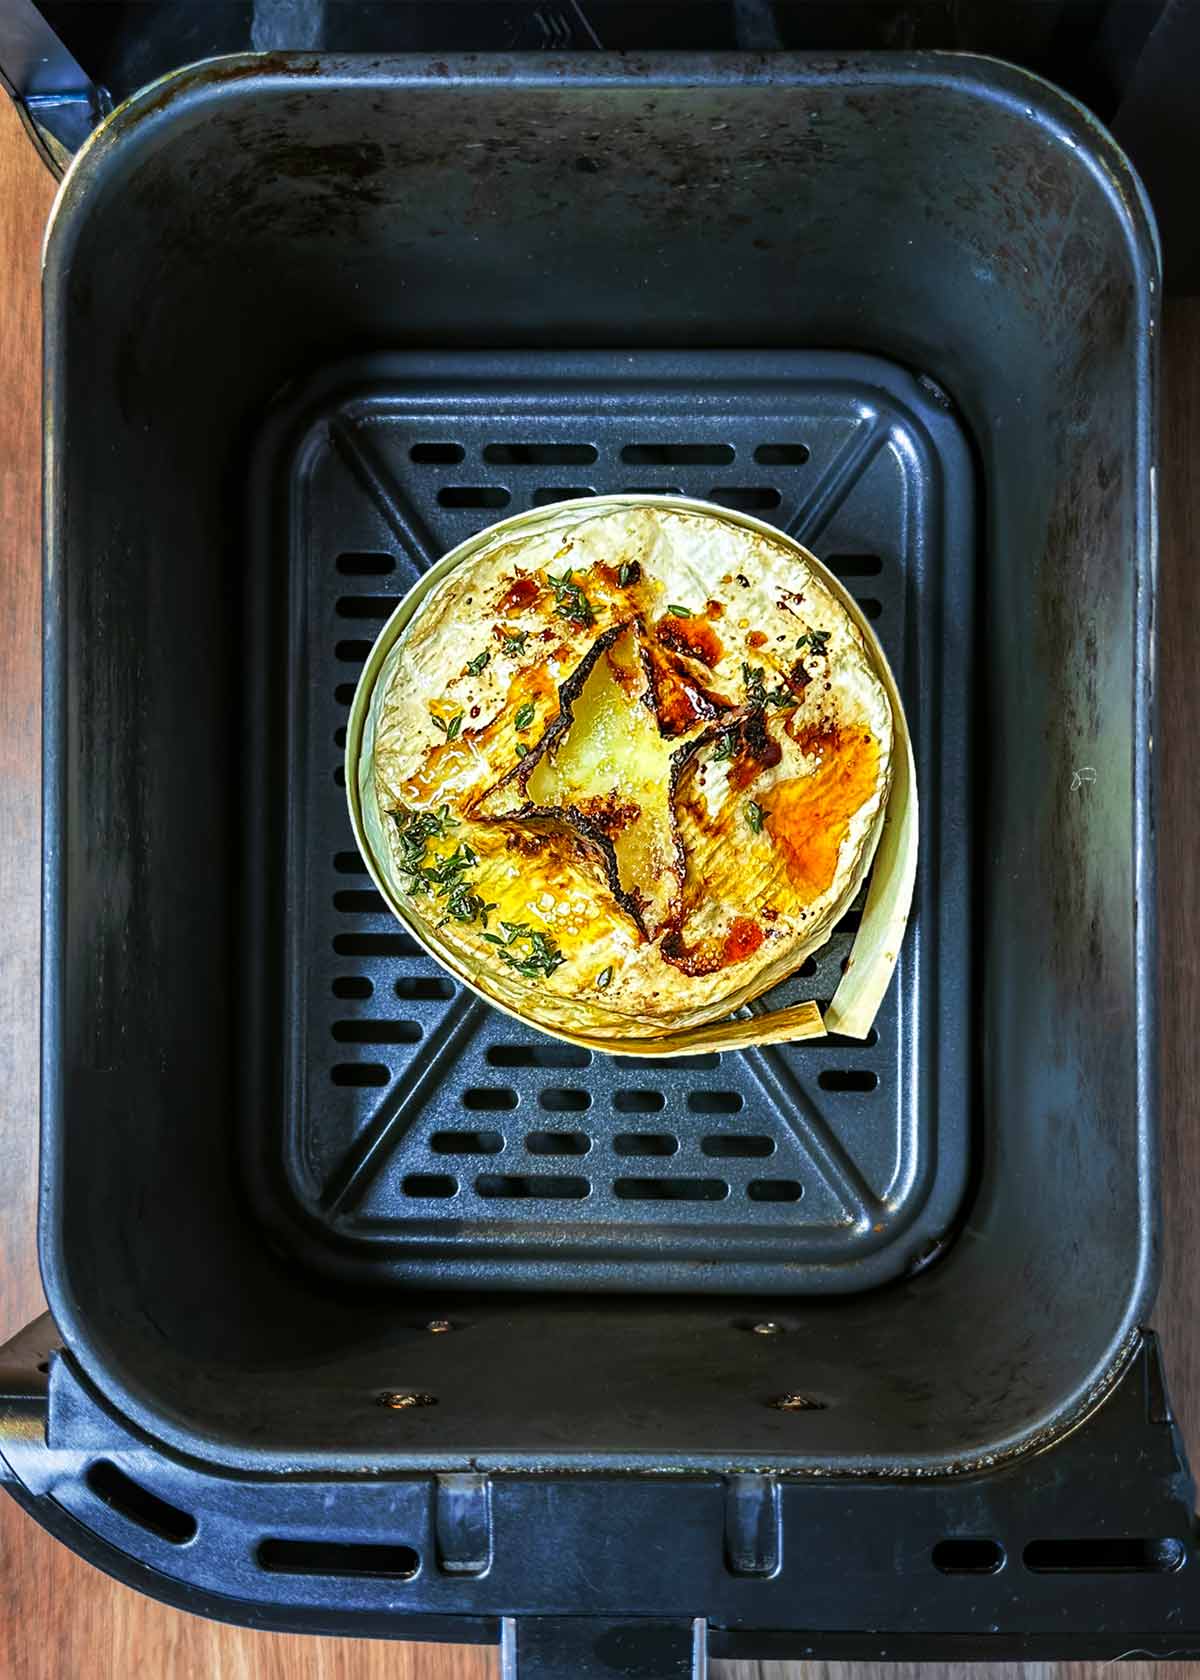 Cooked Camembert in an air fryer basket.